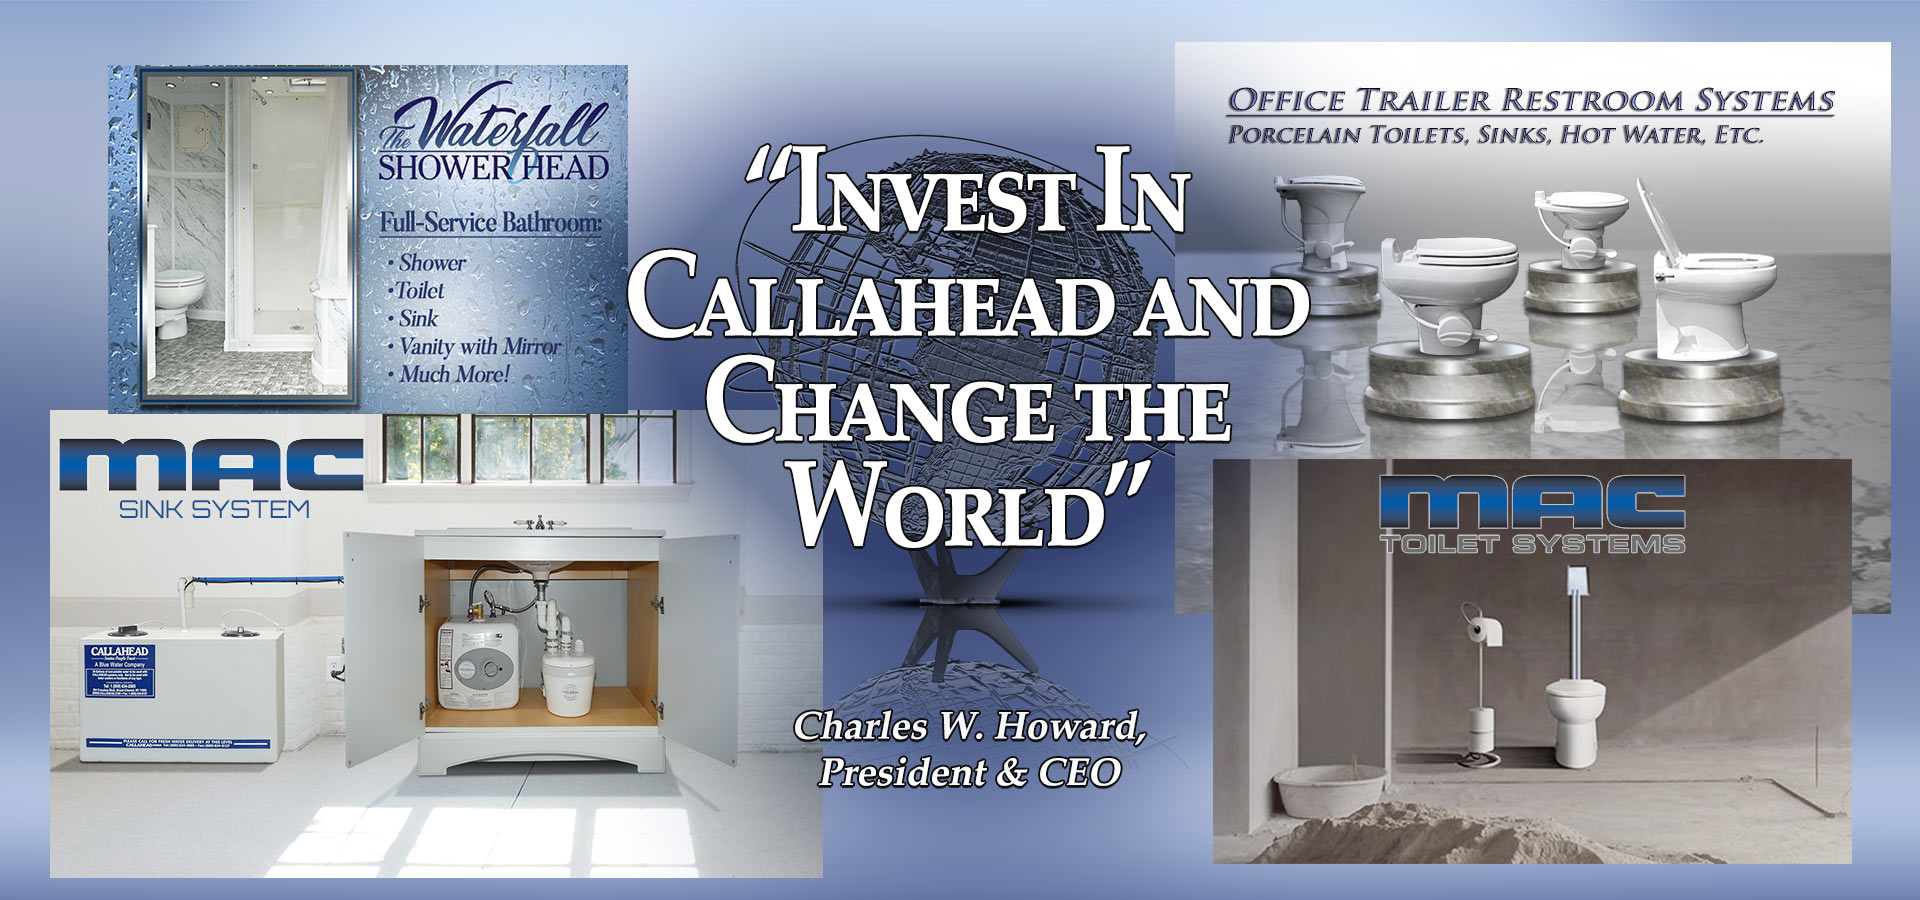 Invest In CALLAHEAD And Change The World - Charles W. Howard, President and CEO